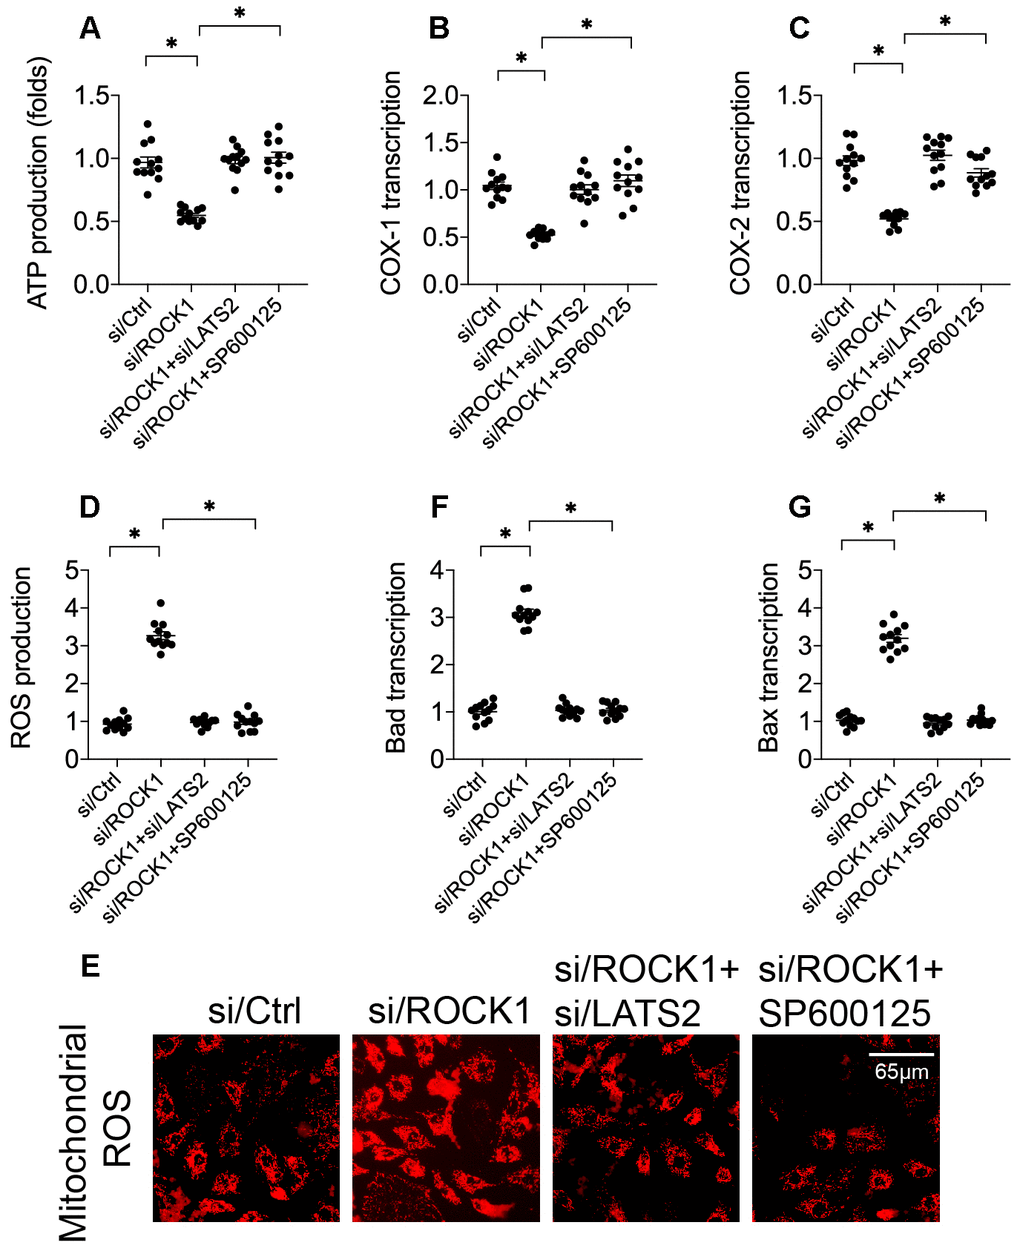 ROCK1 deficiency promotes mitochondrial apoptosis by activating the LATS2-JNK pathway. (A) ATP production was measured in A549 cells after transfection of siRNA against LATS2 (si/LATS2) and SP600125 administration that inhibited LATS2 upregulation and JNK activation, respectively. (B, C) qPCR was used to analyze COX-1 and COX-2 transcription. (D, E) Immunofluorescence was used to measure generation of ROS in A549 cells. (F–G) A qPCR assay was used to detect changes in Bax and Bad levels in A549 cells. *p